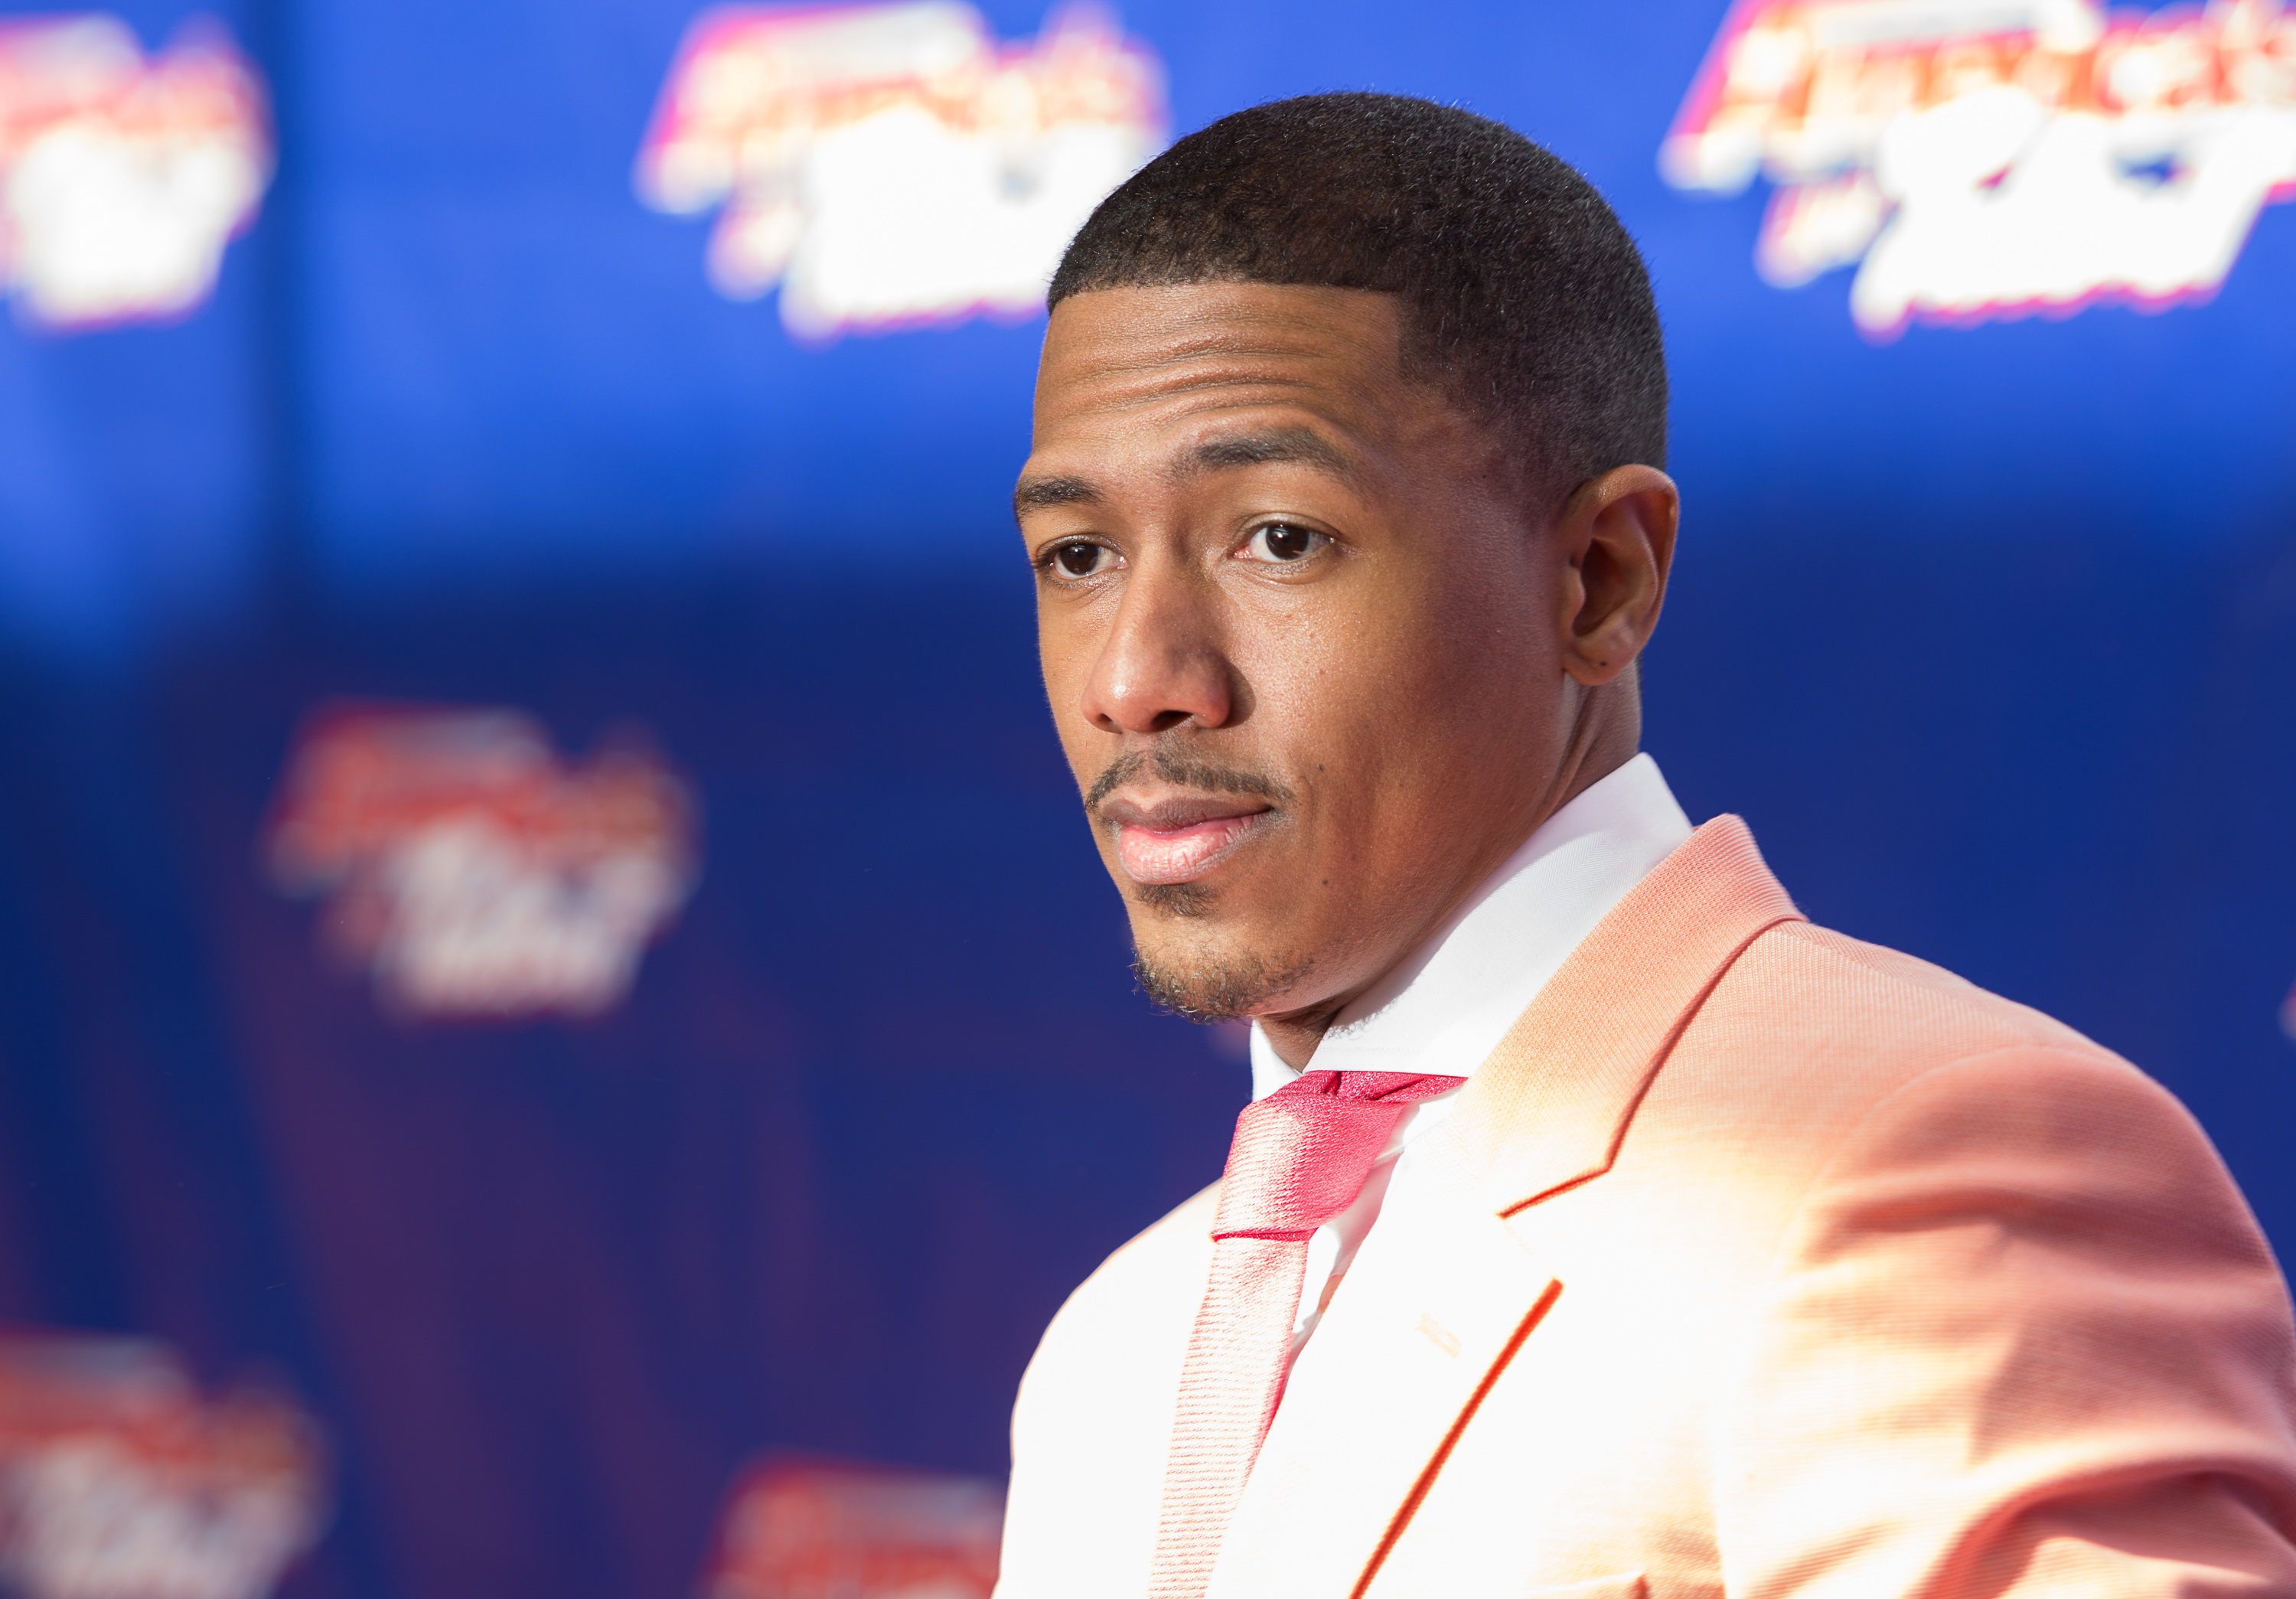 Nick Cannon's Got A New Hosting Gig On NBC.